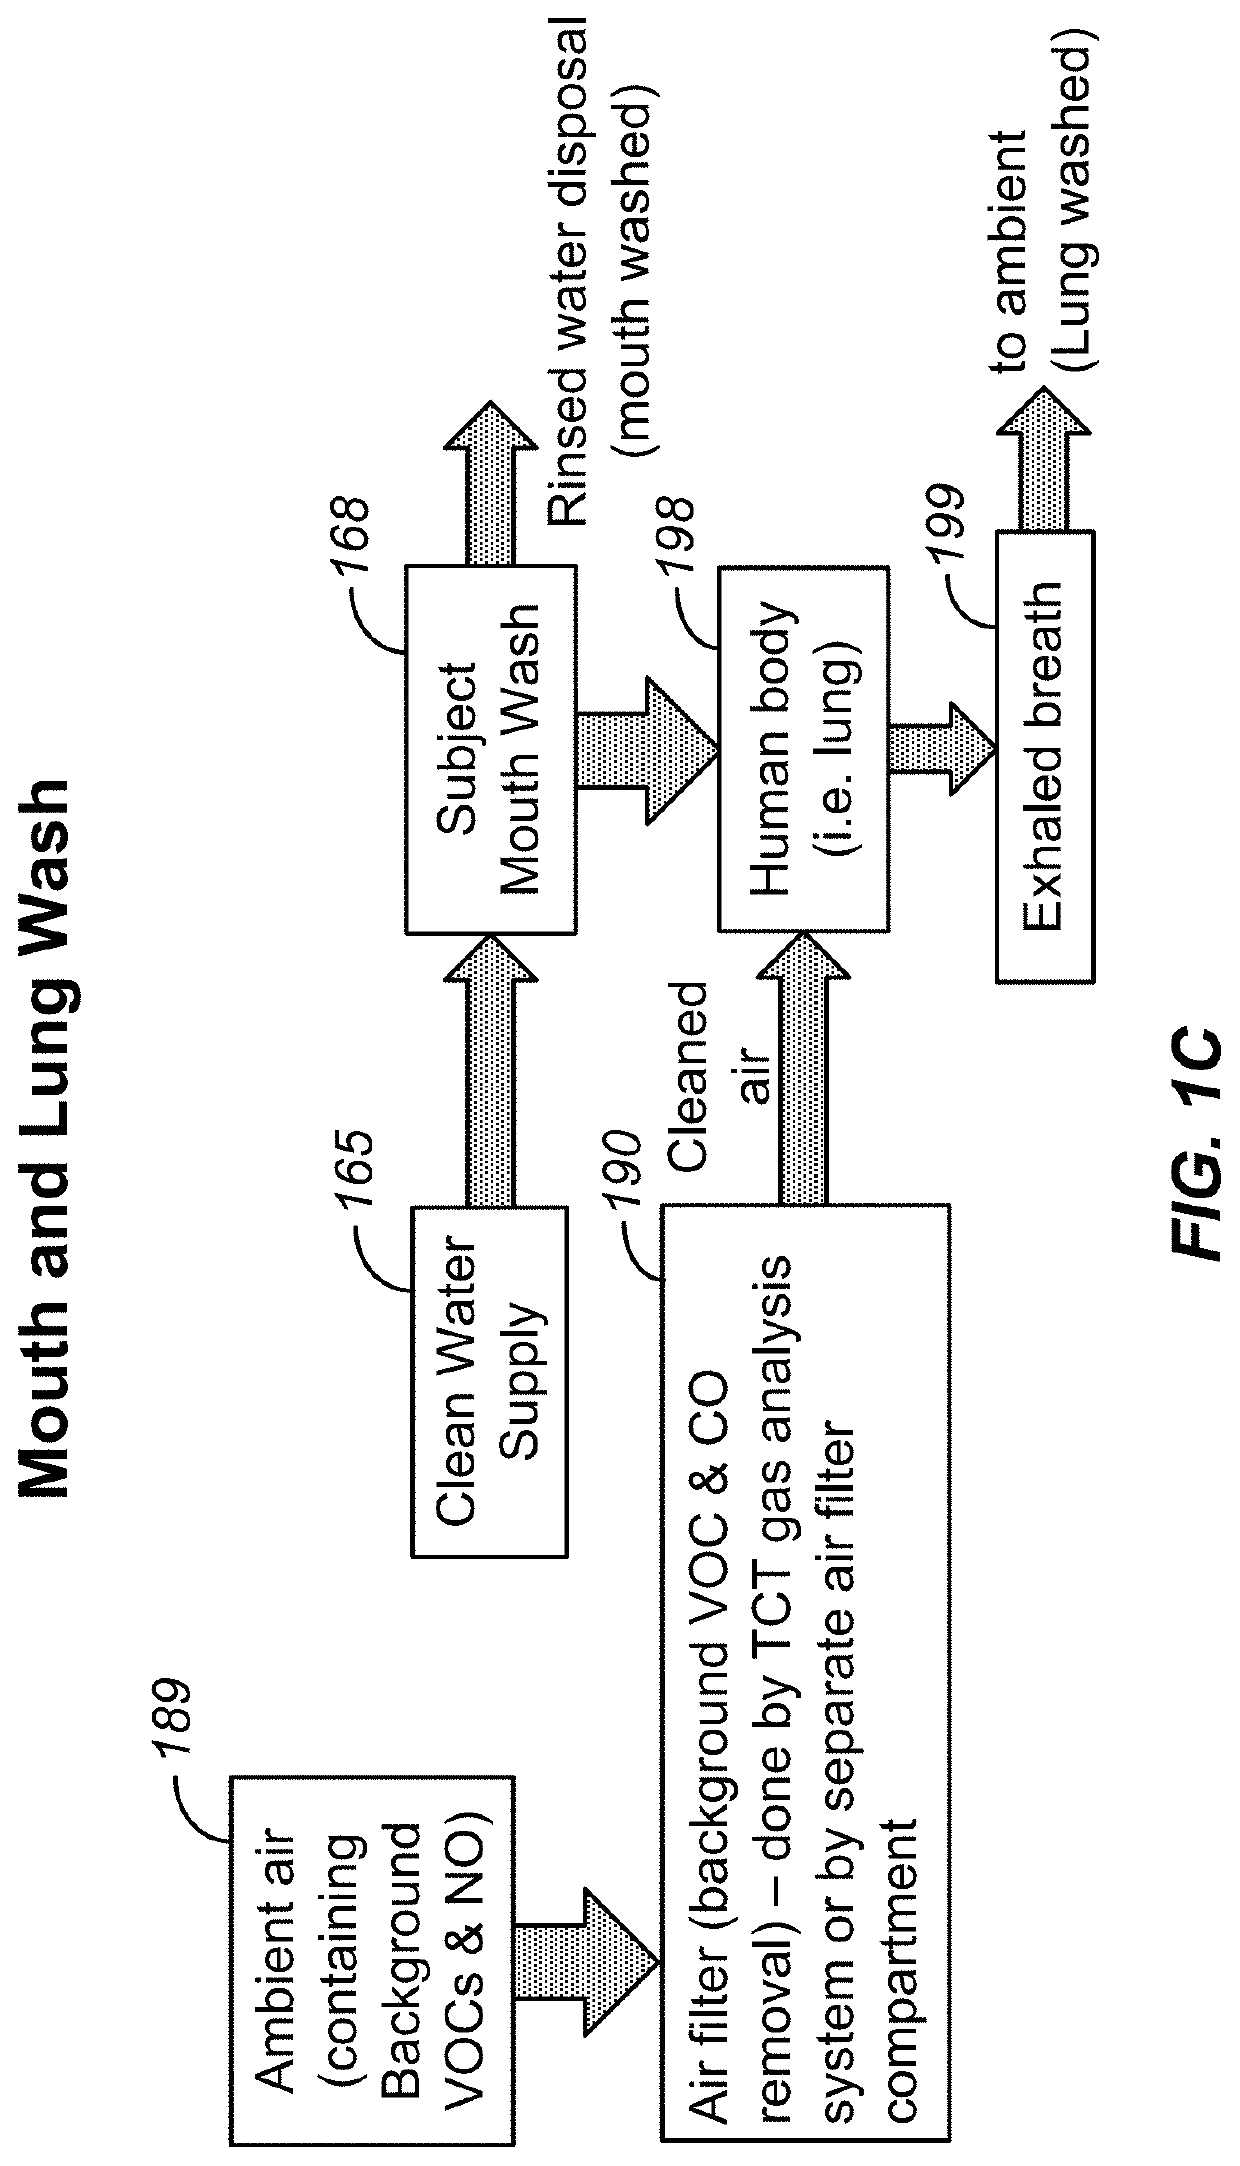 Breath analysis systems and methods for asthma, tuberculosis and lung cancer diagnostics and disease management